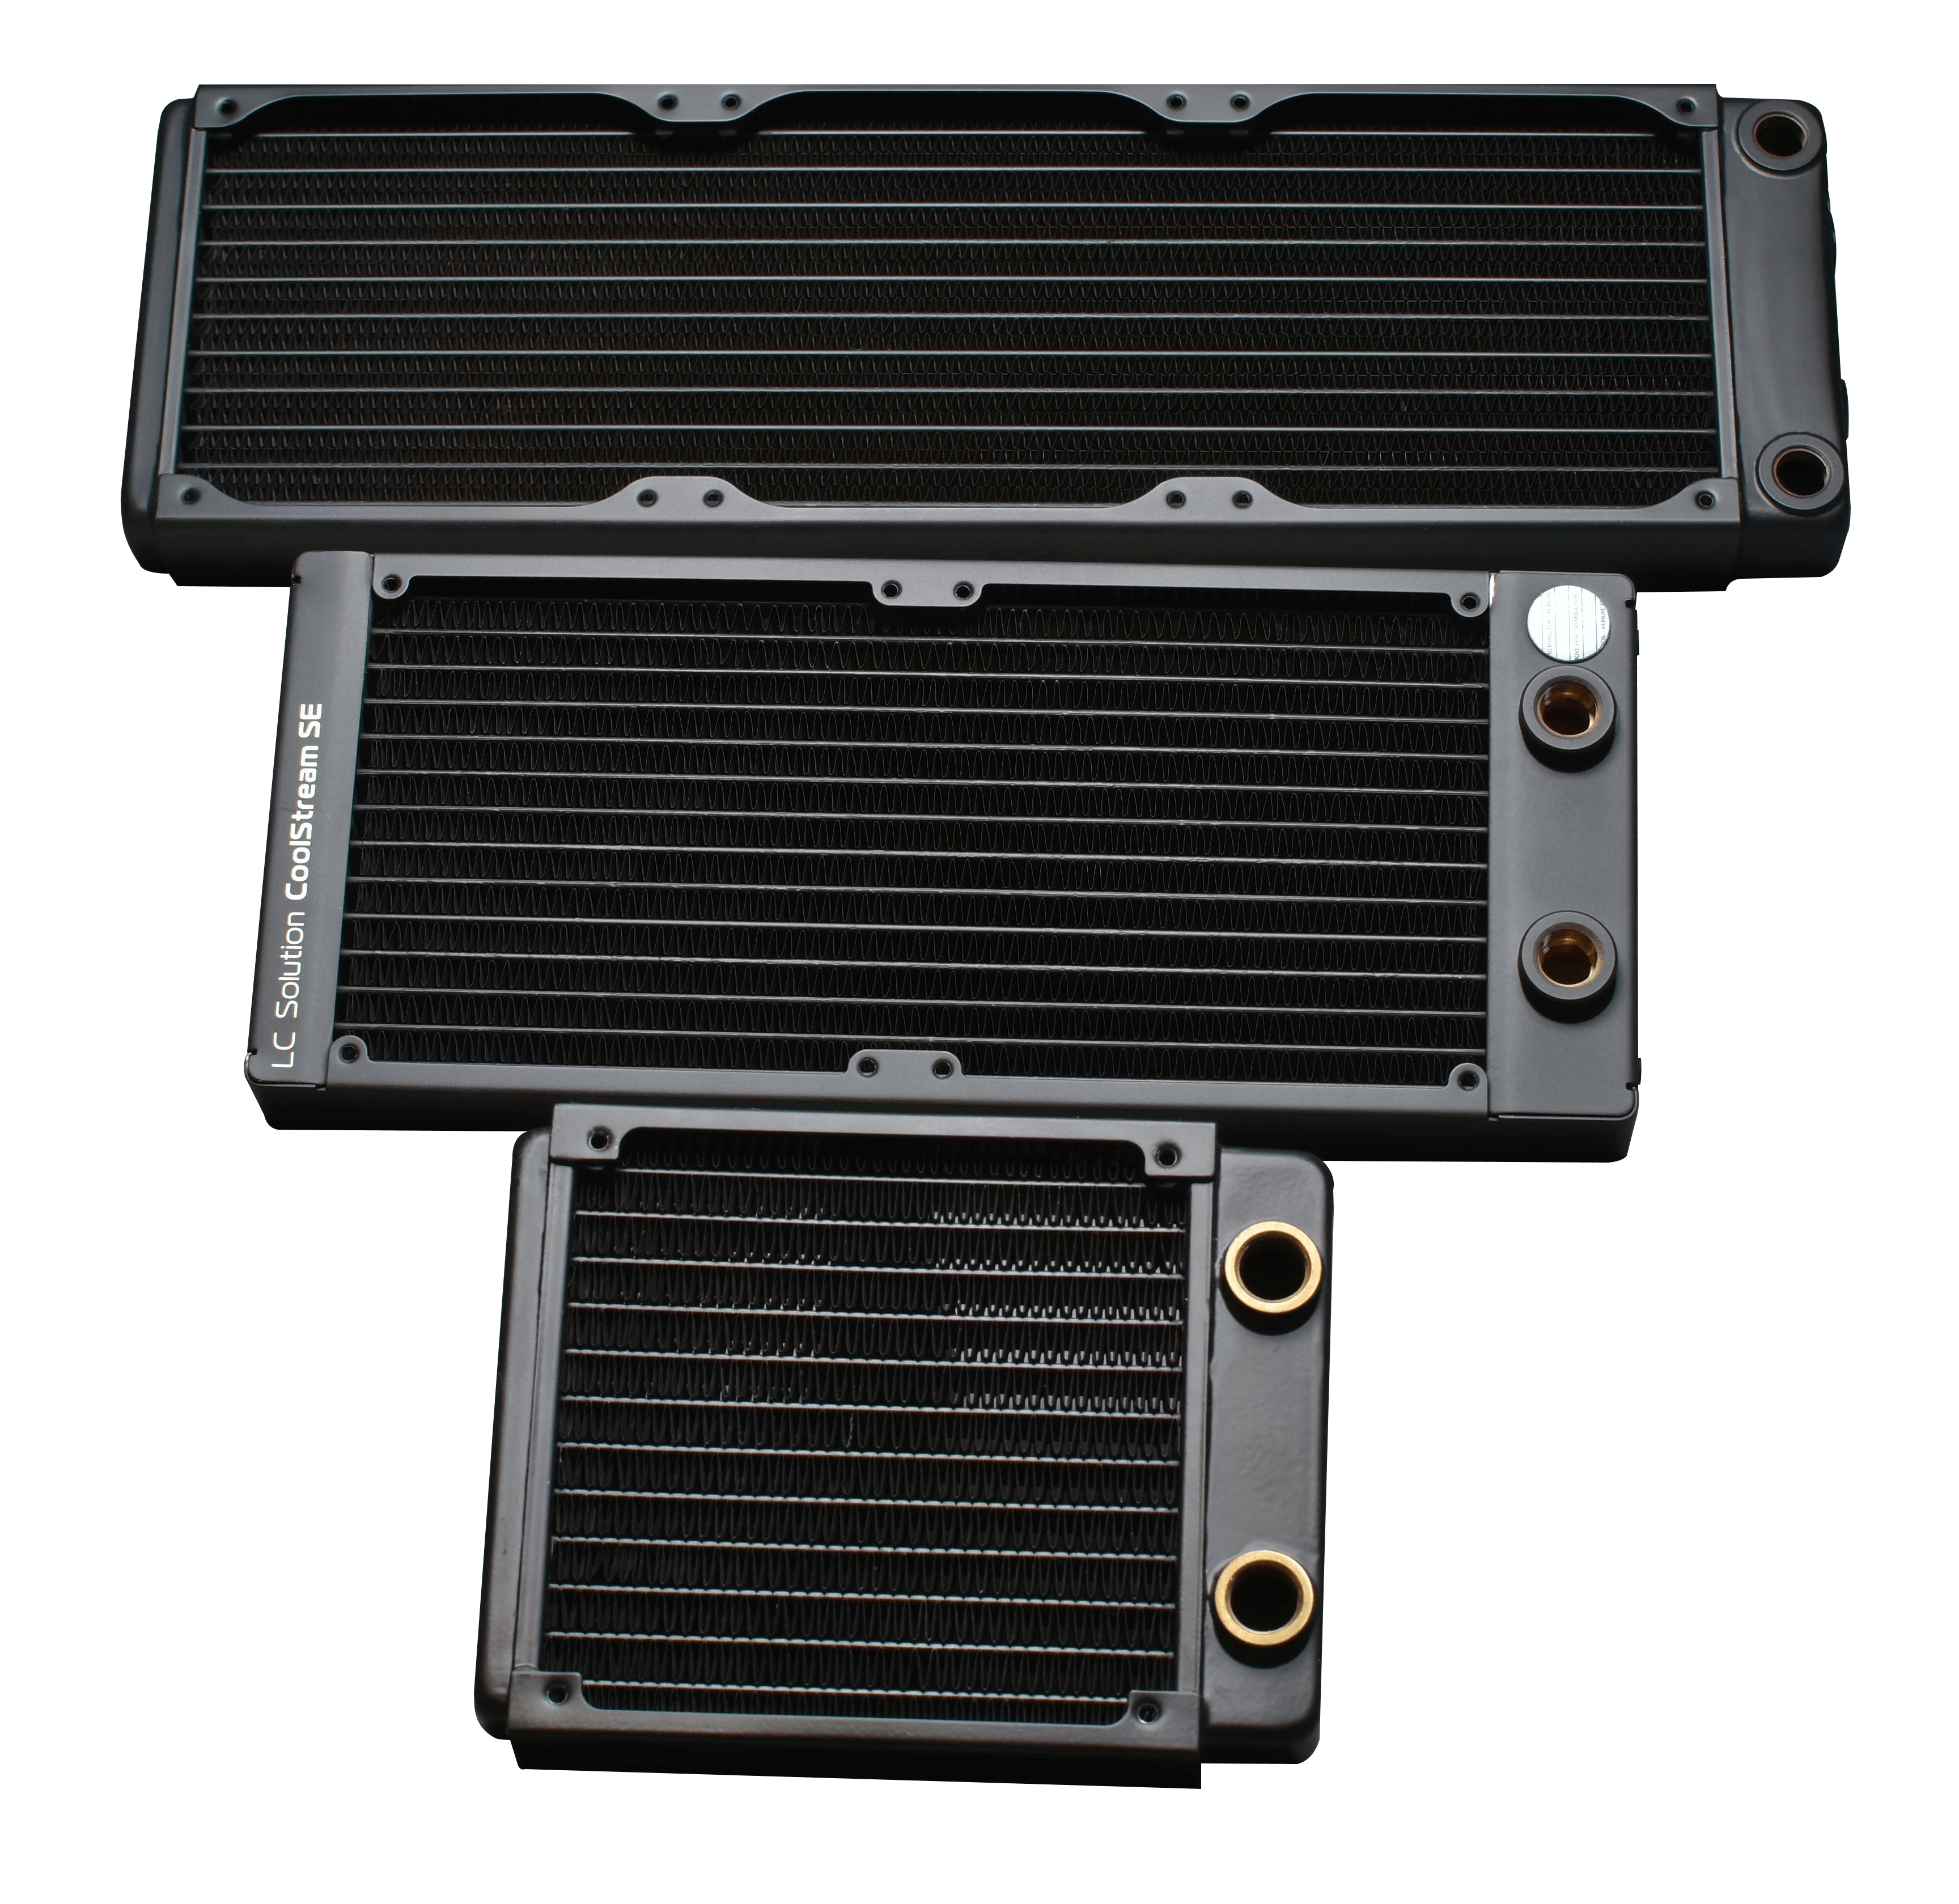 PC water cooling radiators in their most common sizes.